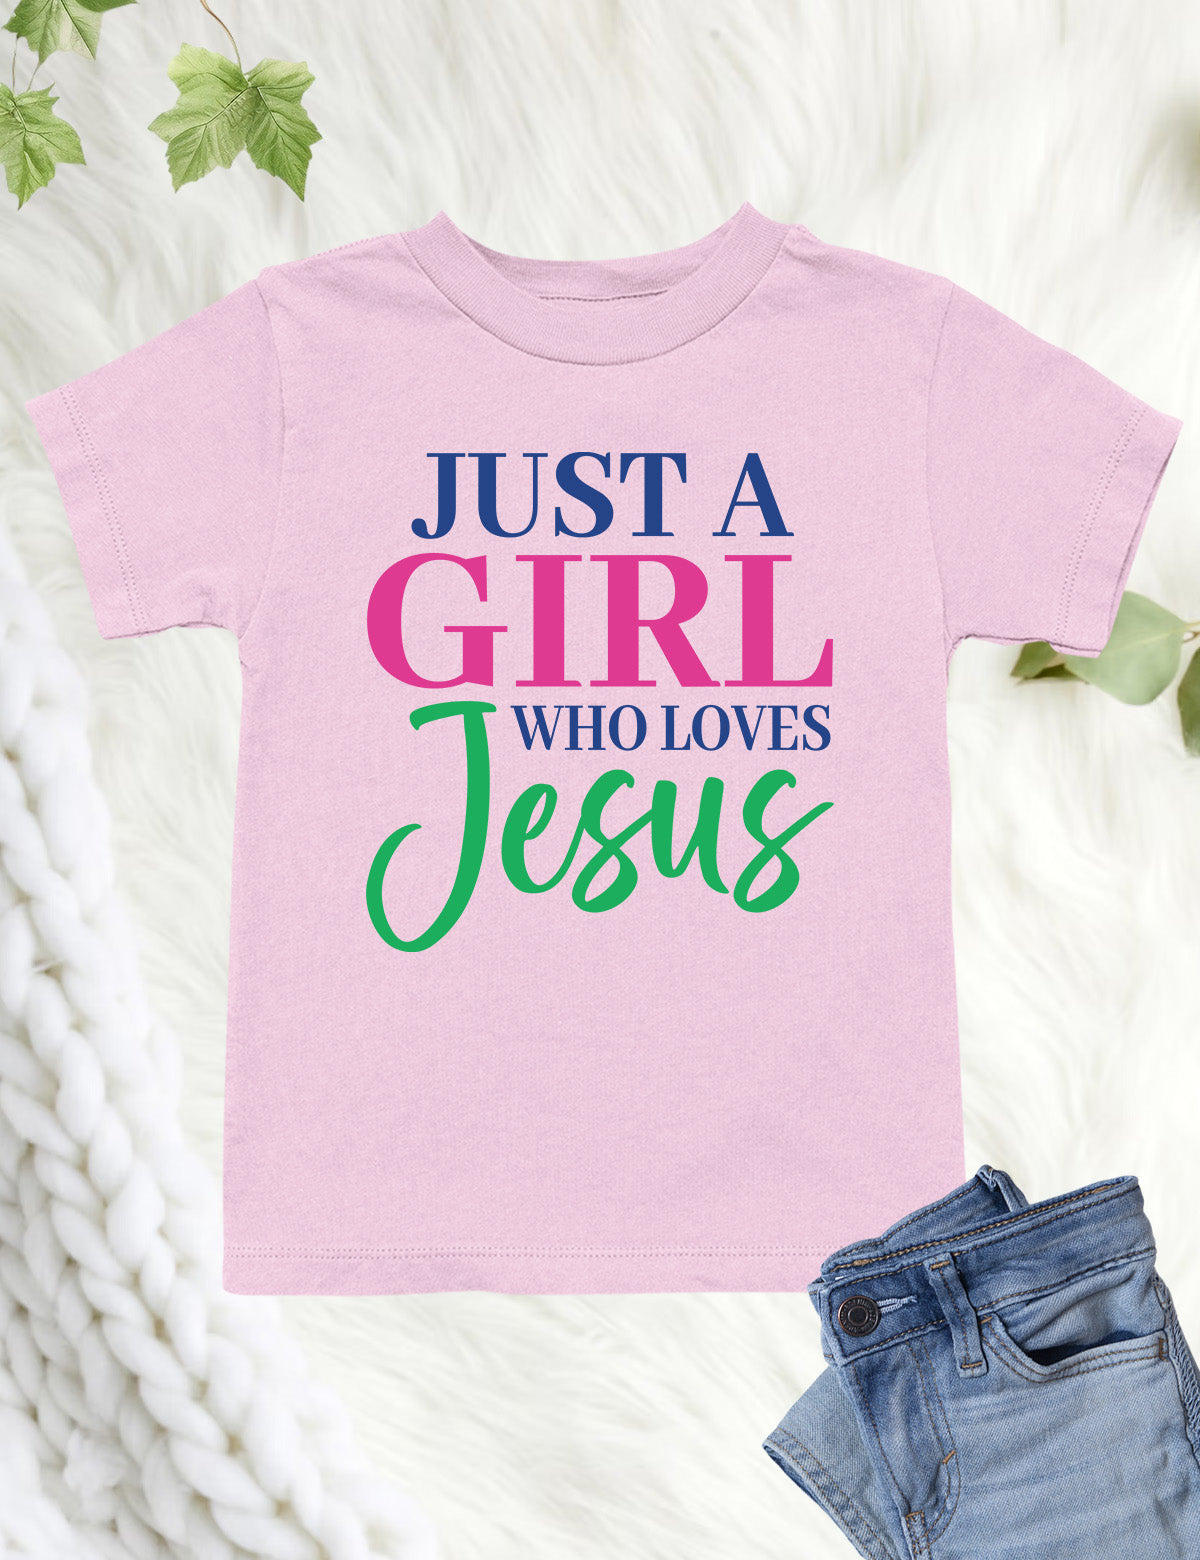 Just a Girl Who Loves Jesus Kids Tee